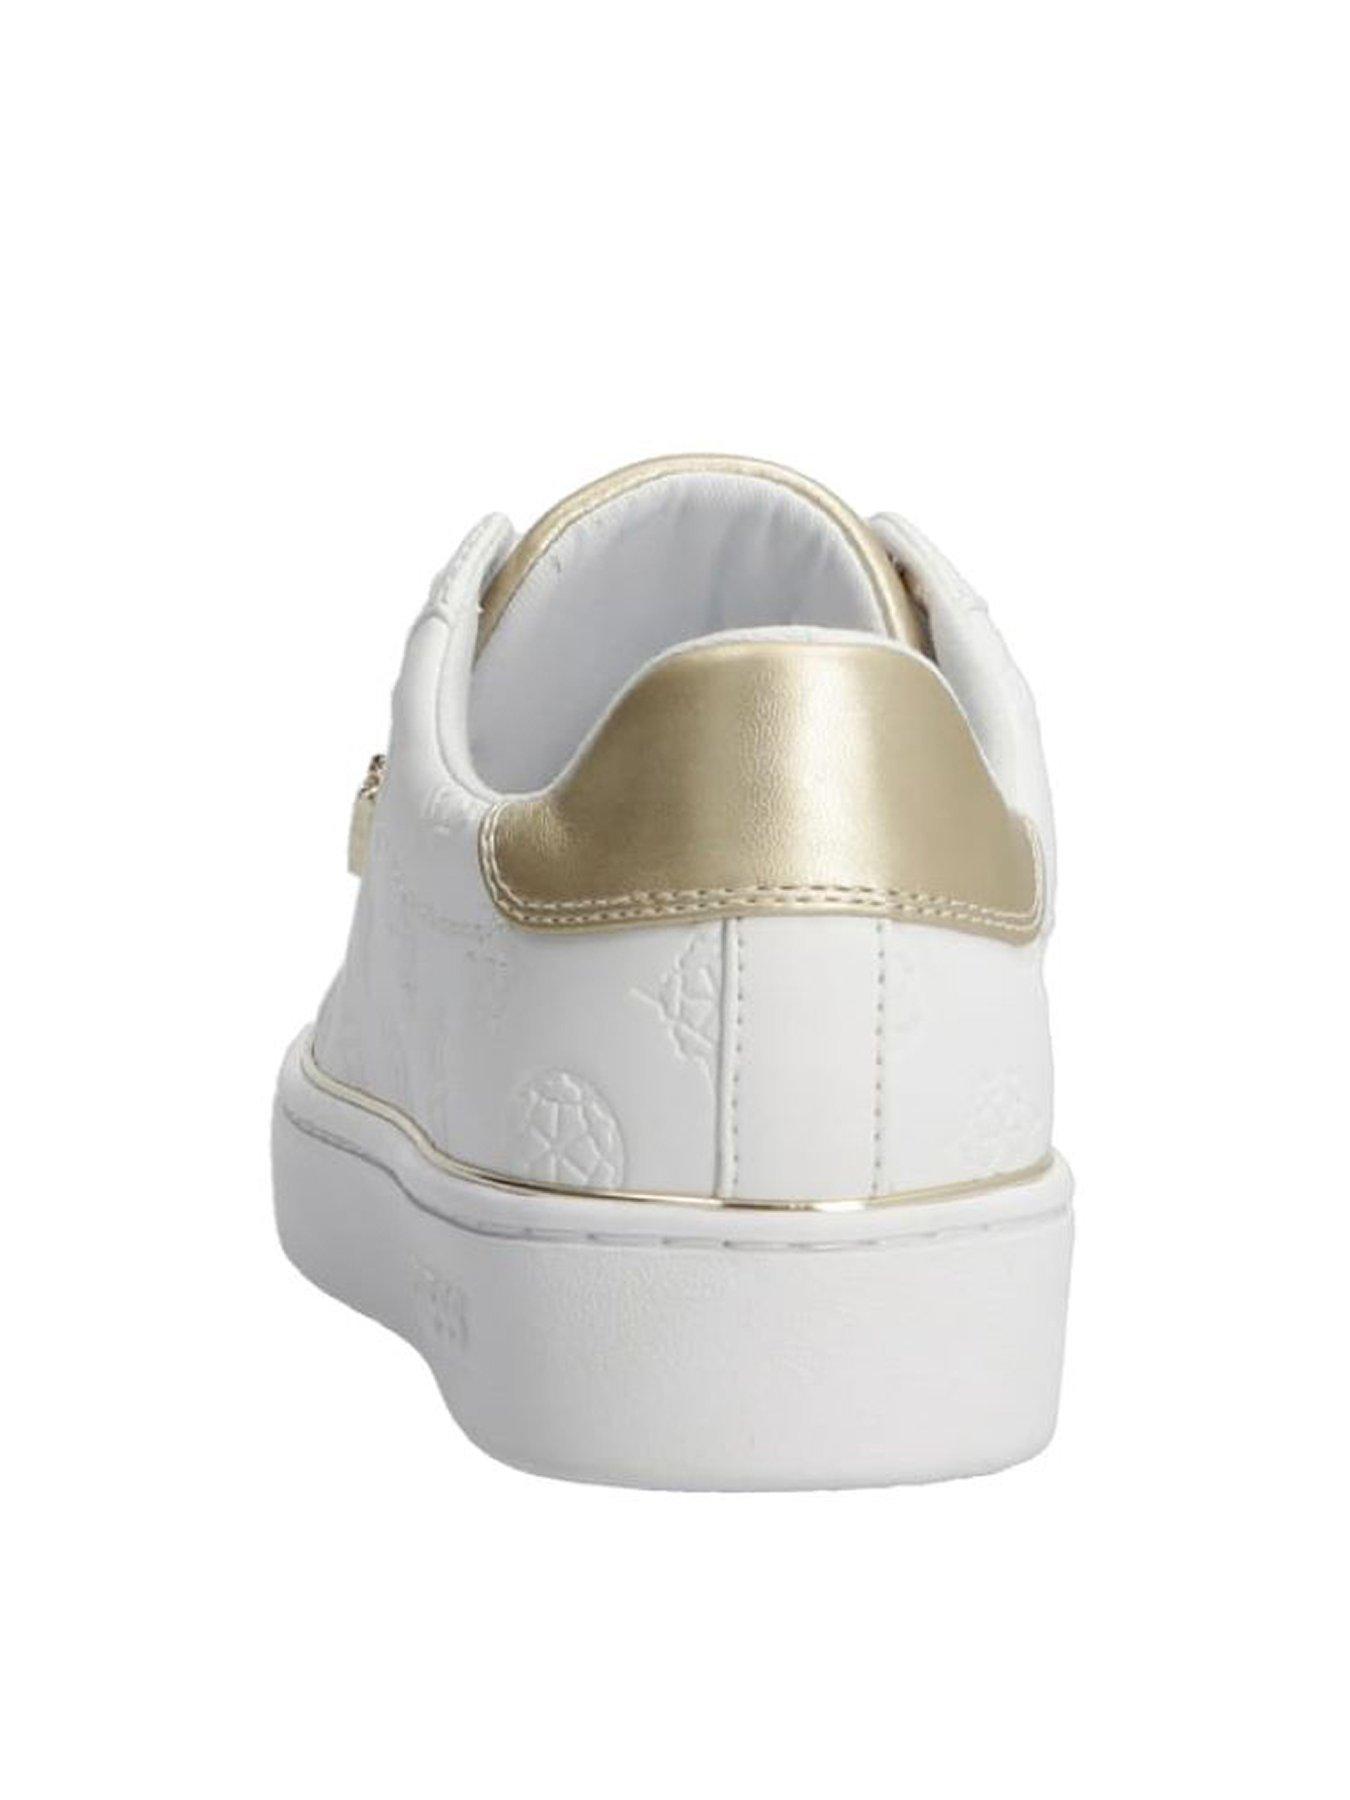 Guess Beckie Gold Detail Lace Up Trainers - White 